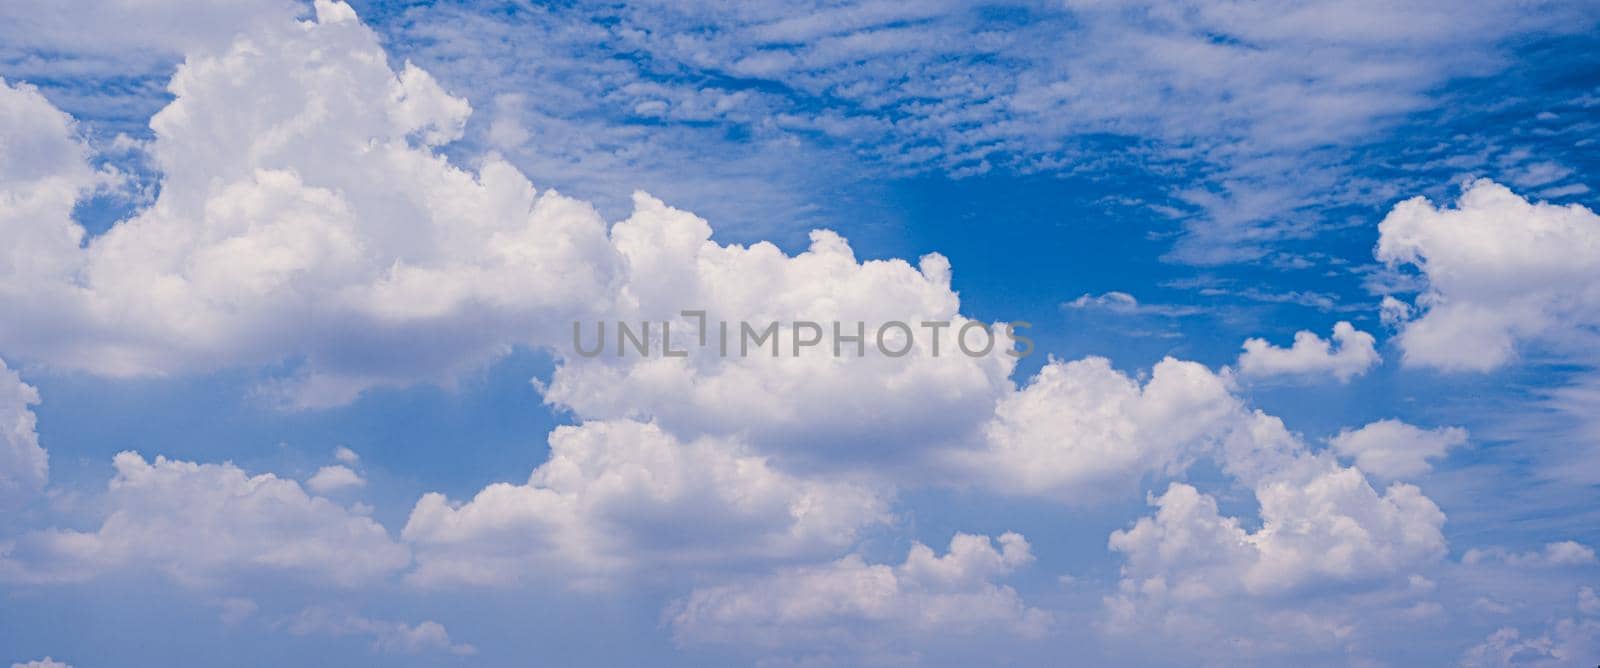 white fluffys clouds with blue sky nature background abstract weather season. by Petrichor